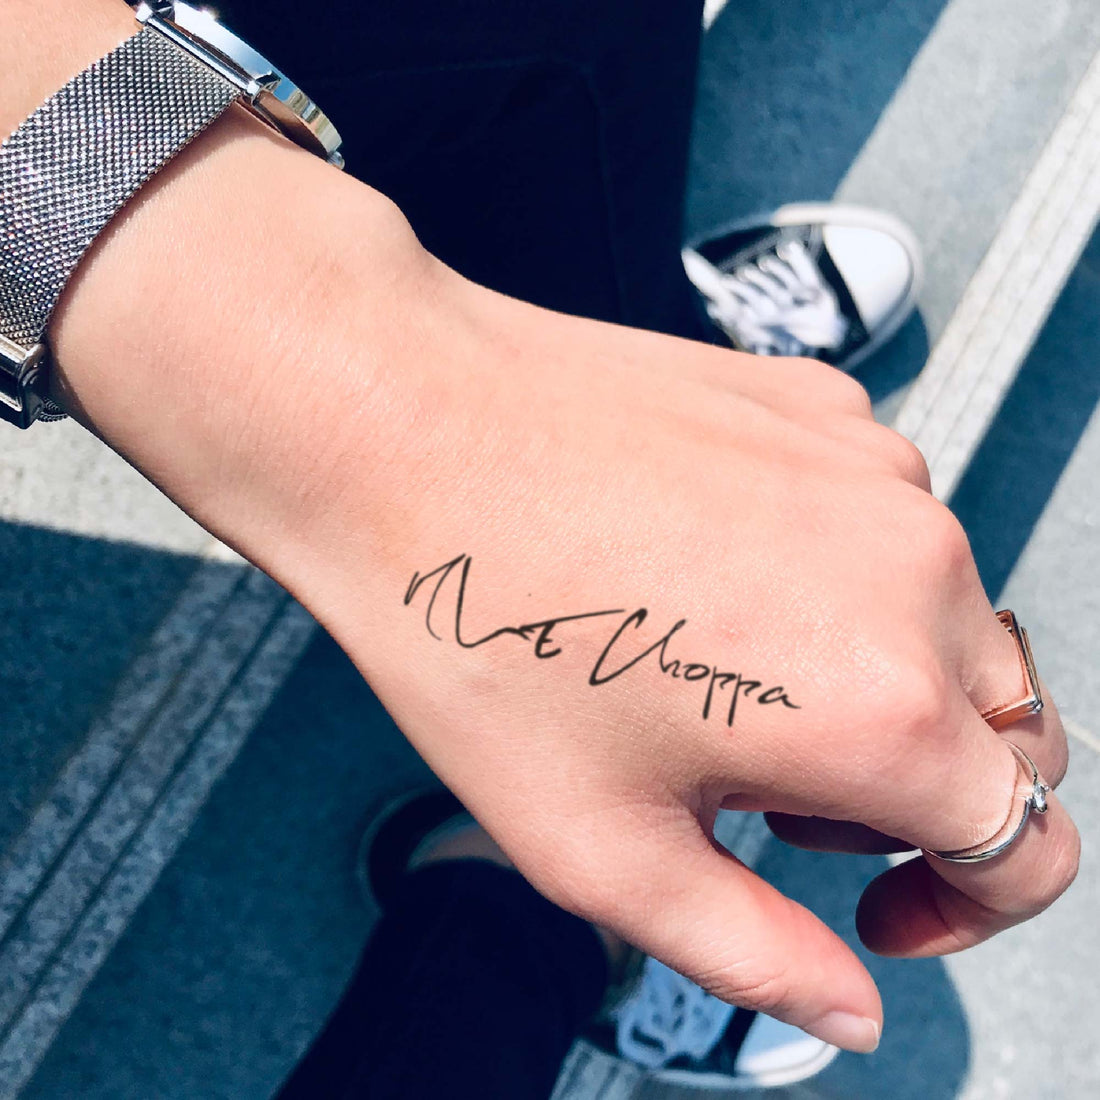 NLE Choppa custom temporary tattoo sticker design idea inspiration meanings removal arm wrist hand words font name signature calligraphy lyrics tour concert outfits merch accessory gift souvenir costumes wear dress up code